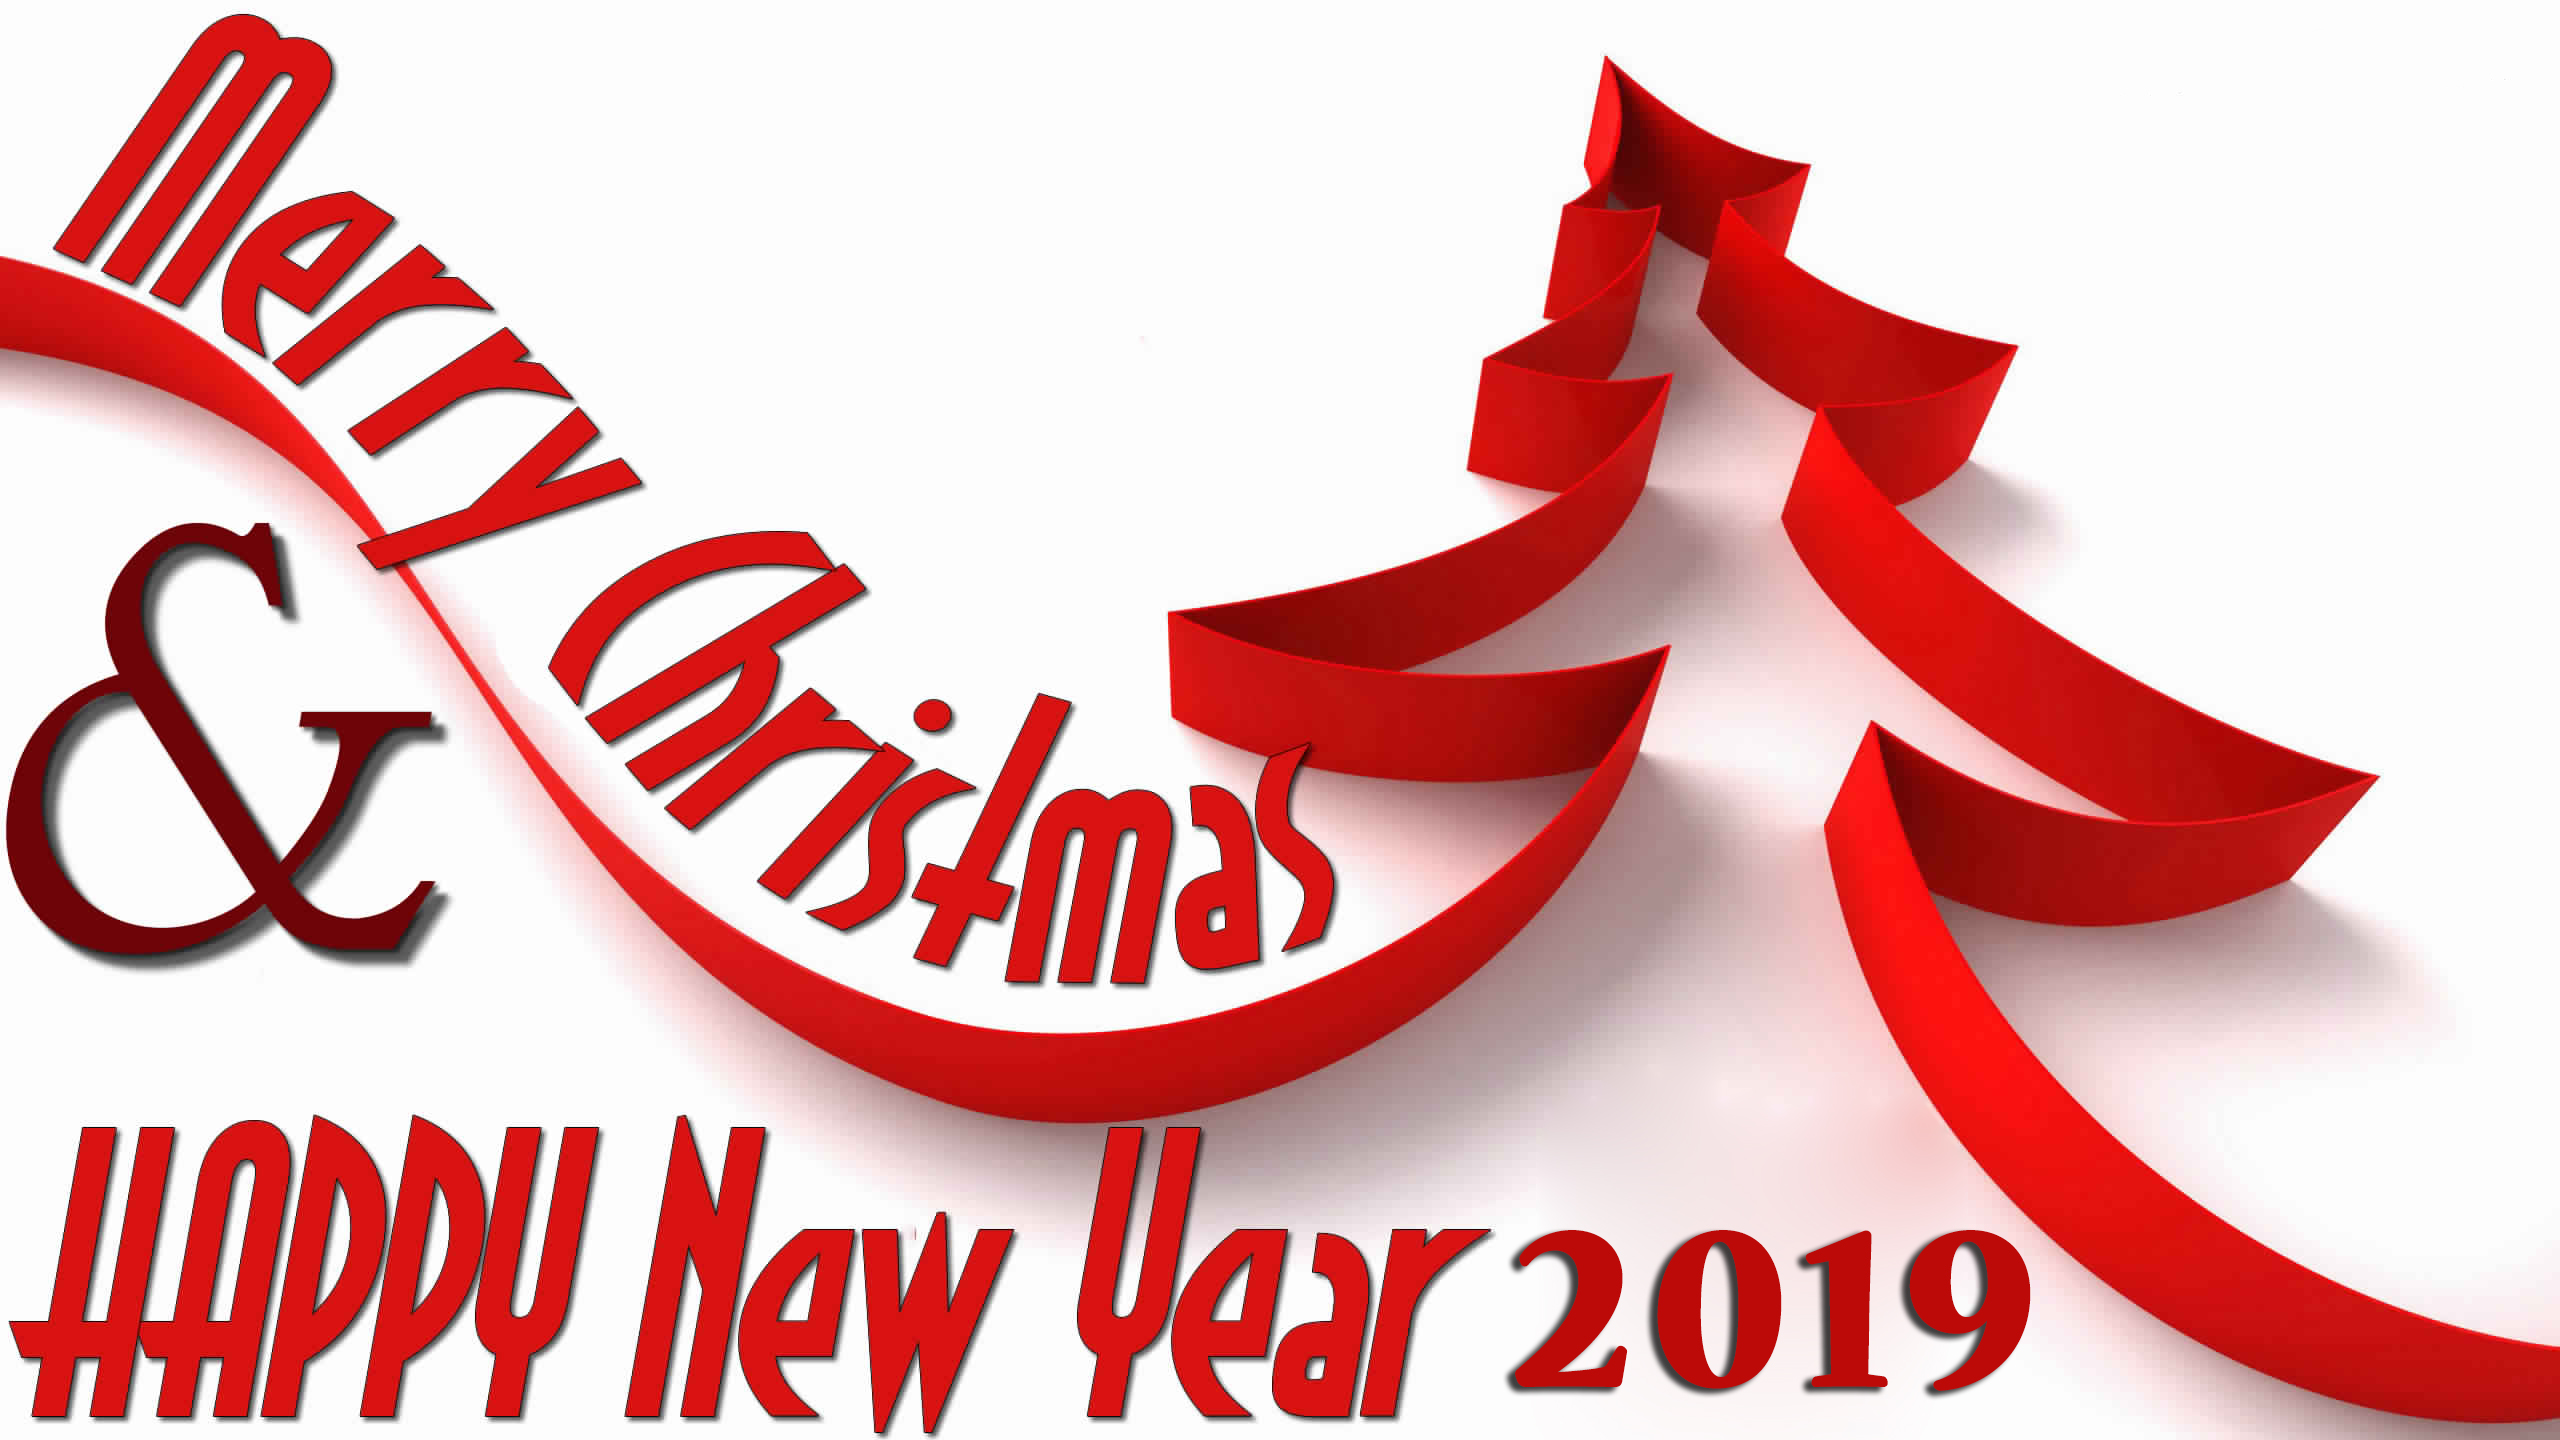 Merry Christmas And Happy New Year Images Wishes